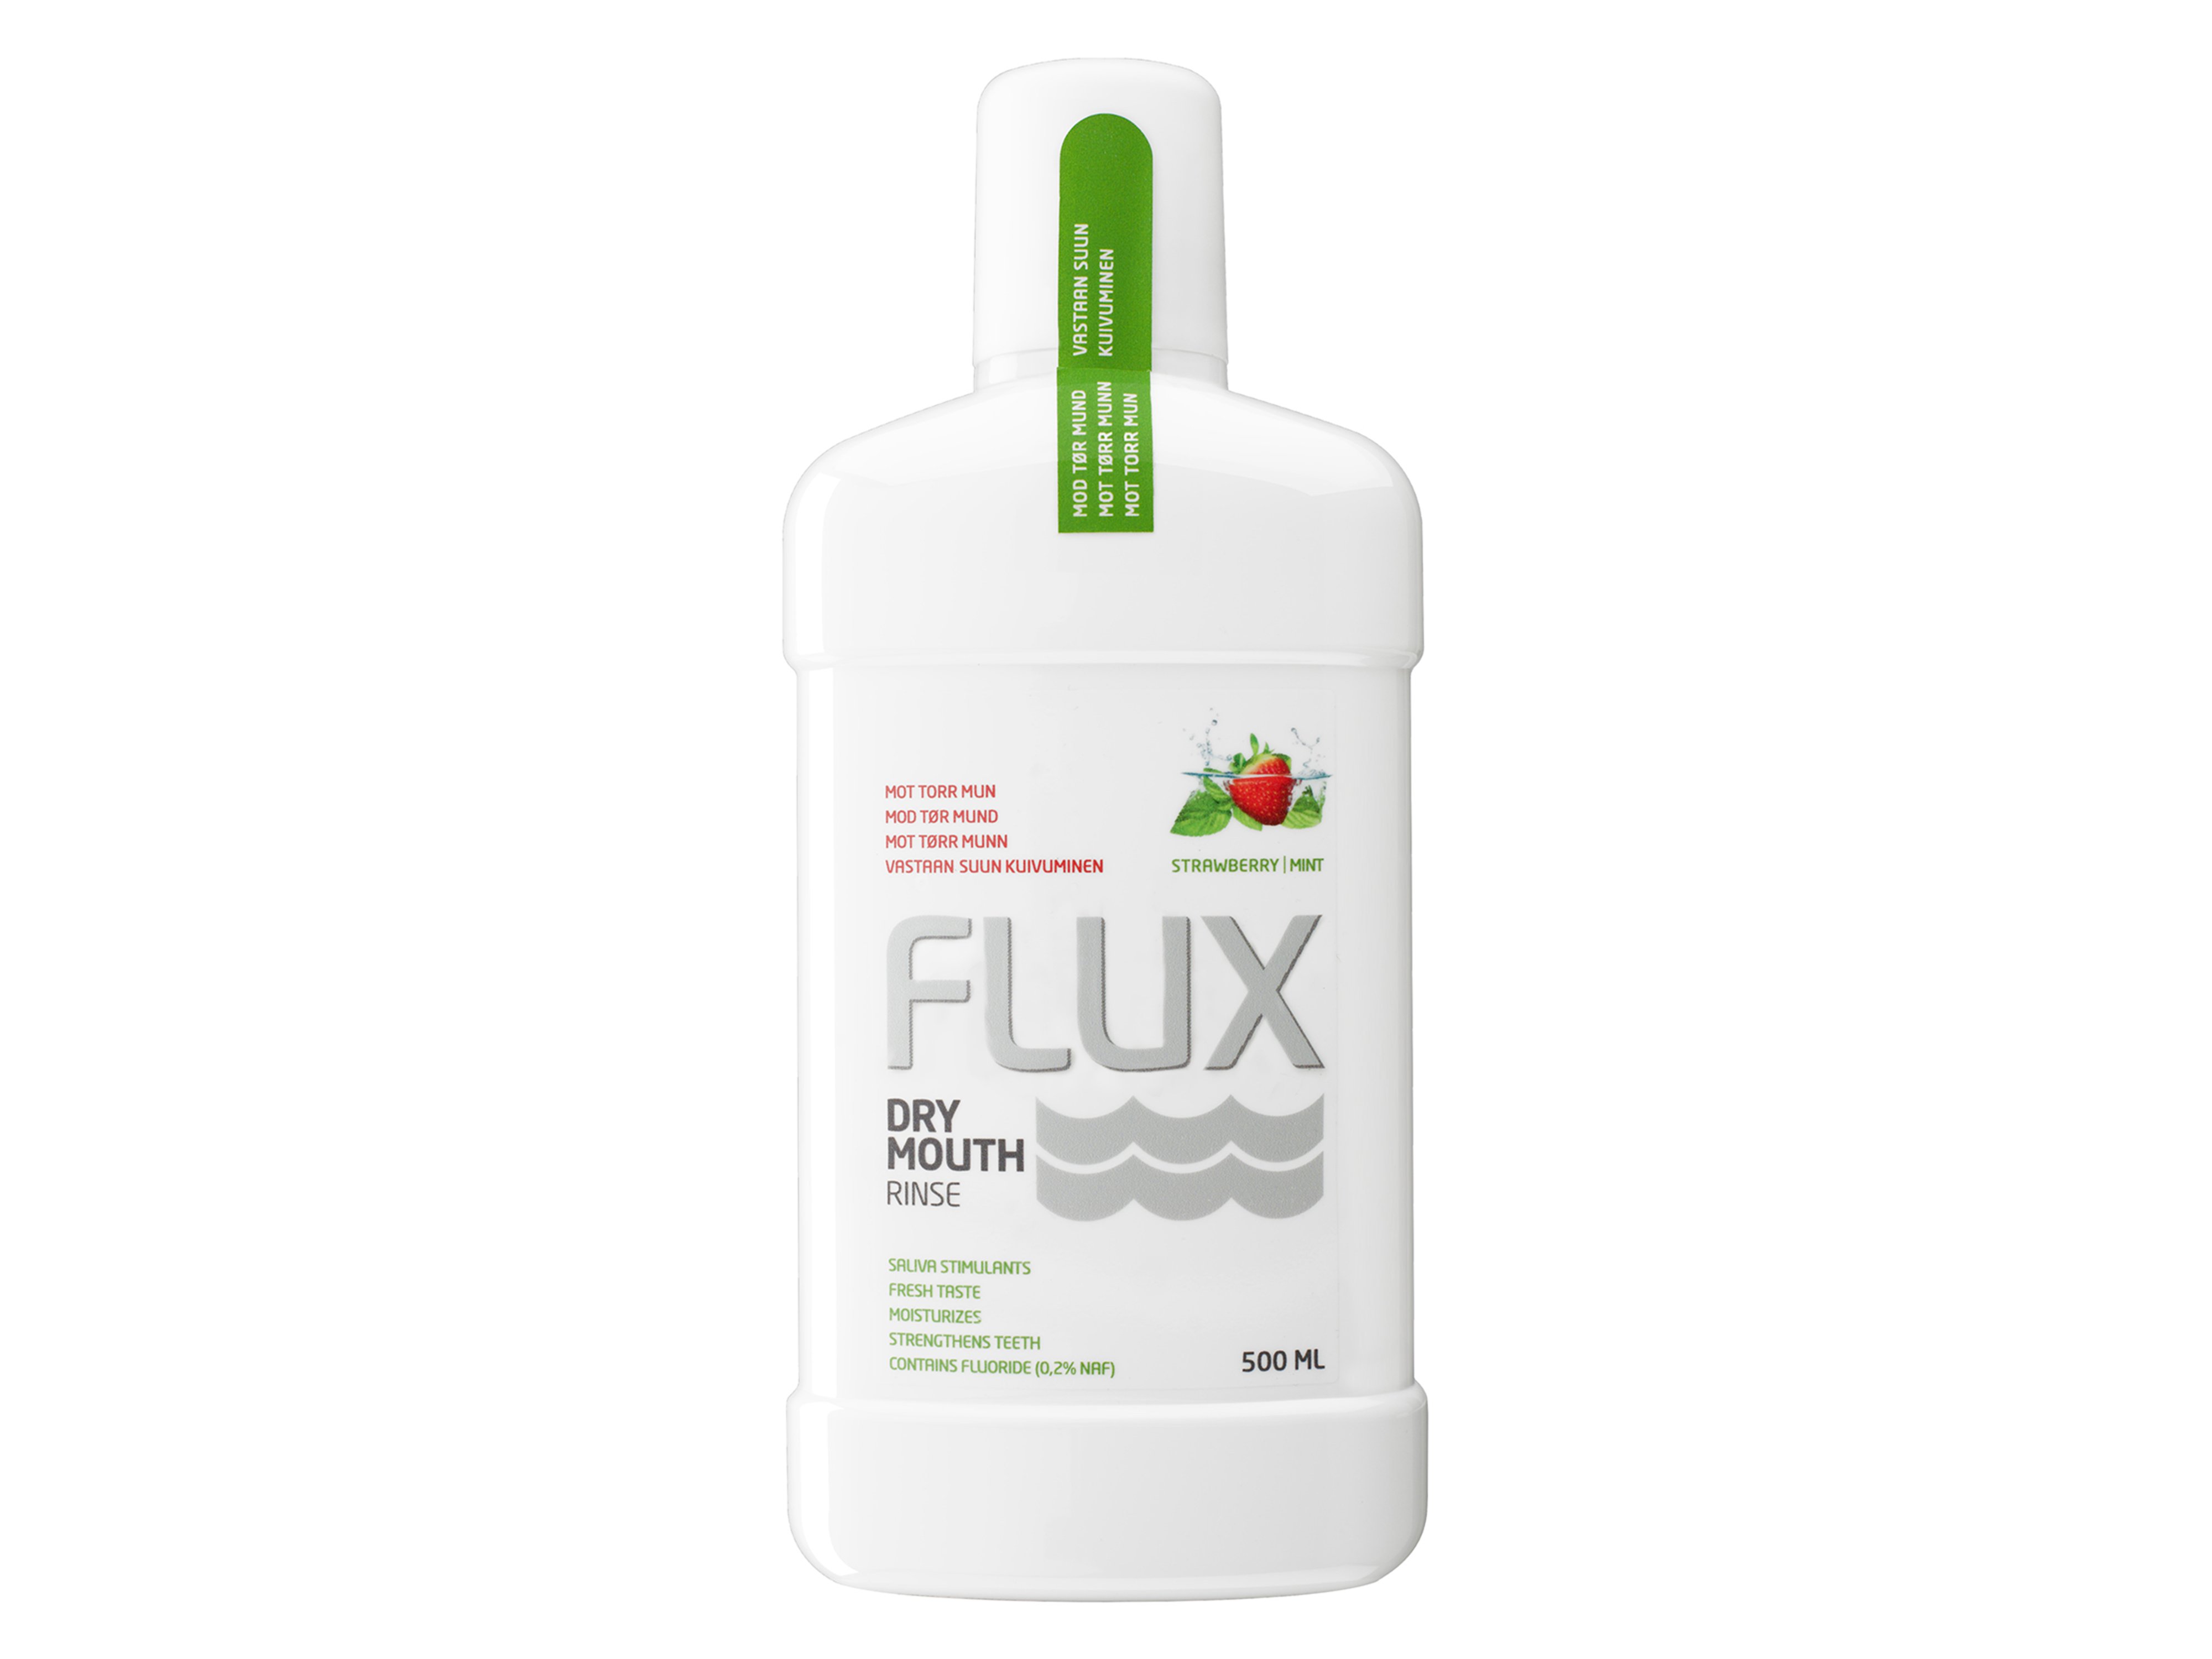 Flux Dry Mouth Fluorskyll, 500 ml